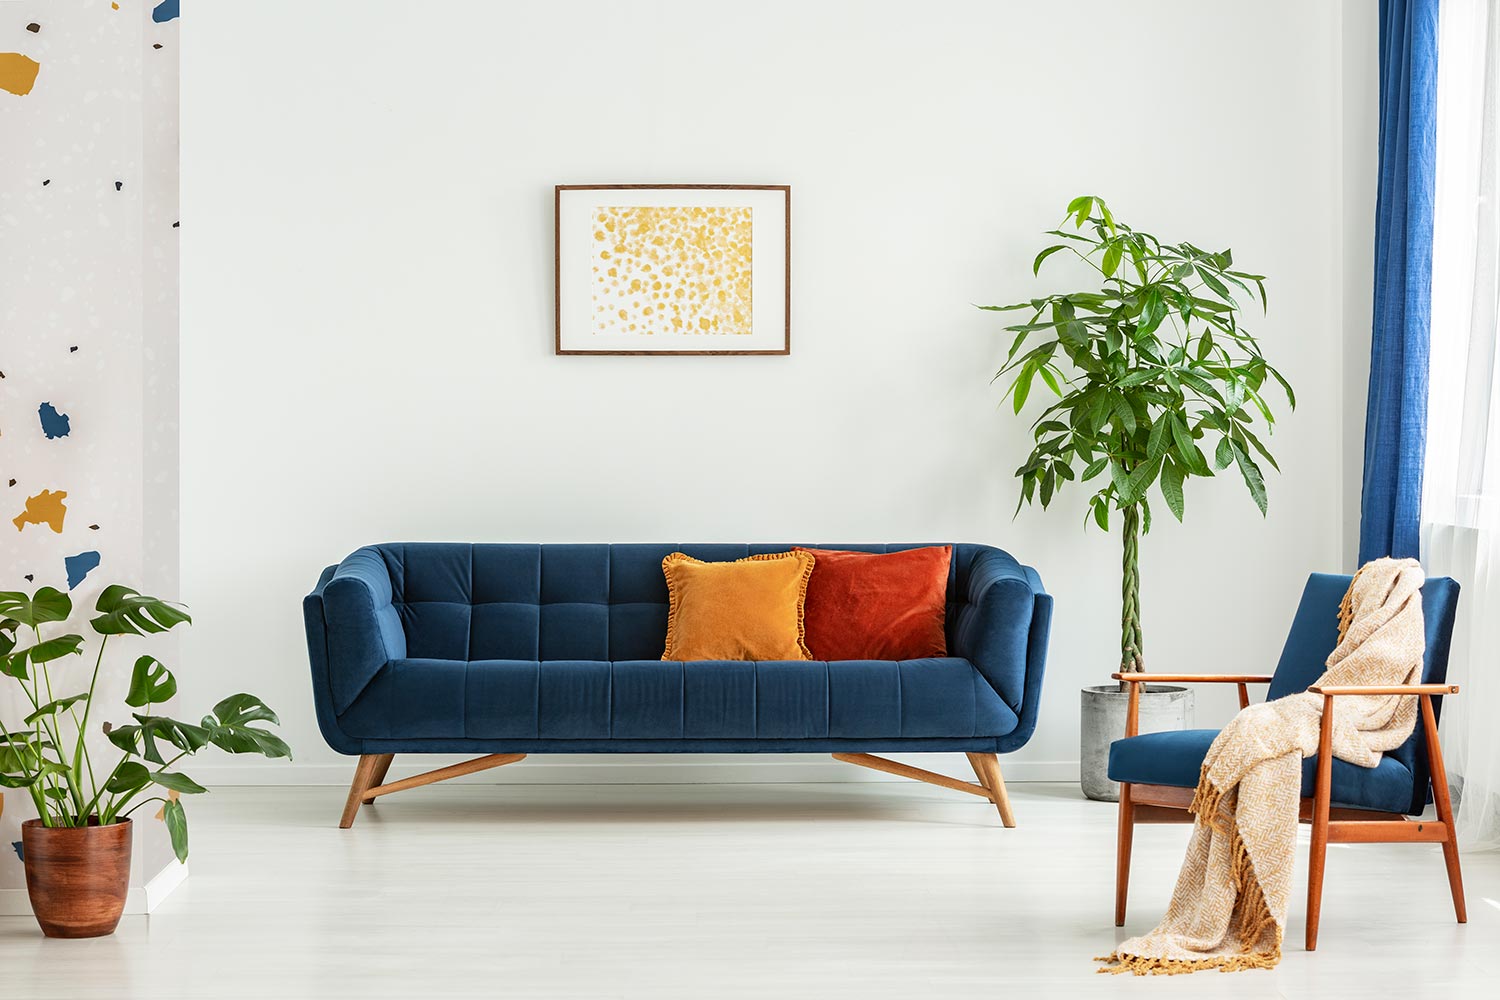 Mid-century modern chair with a blanket and a large sofa with colorful cushions in a spacious living room inter